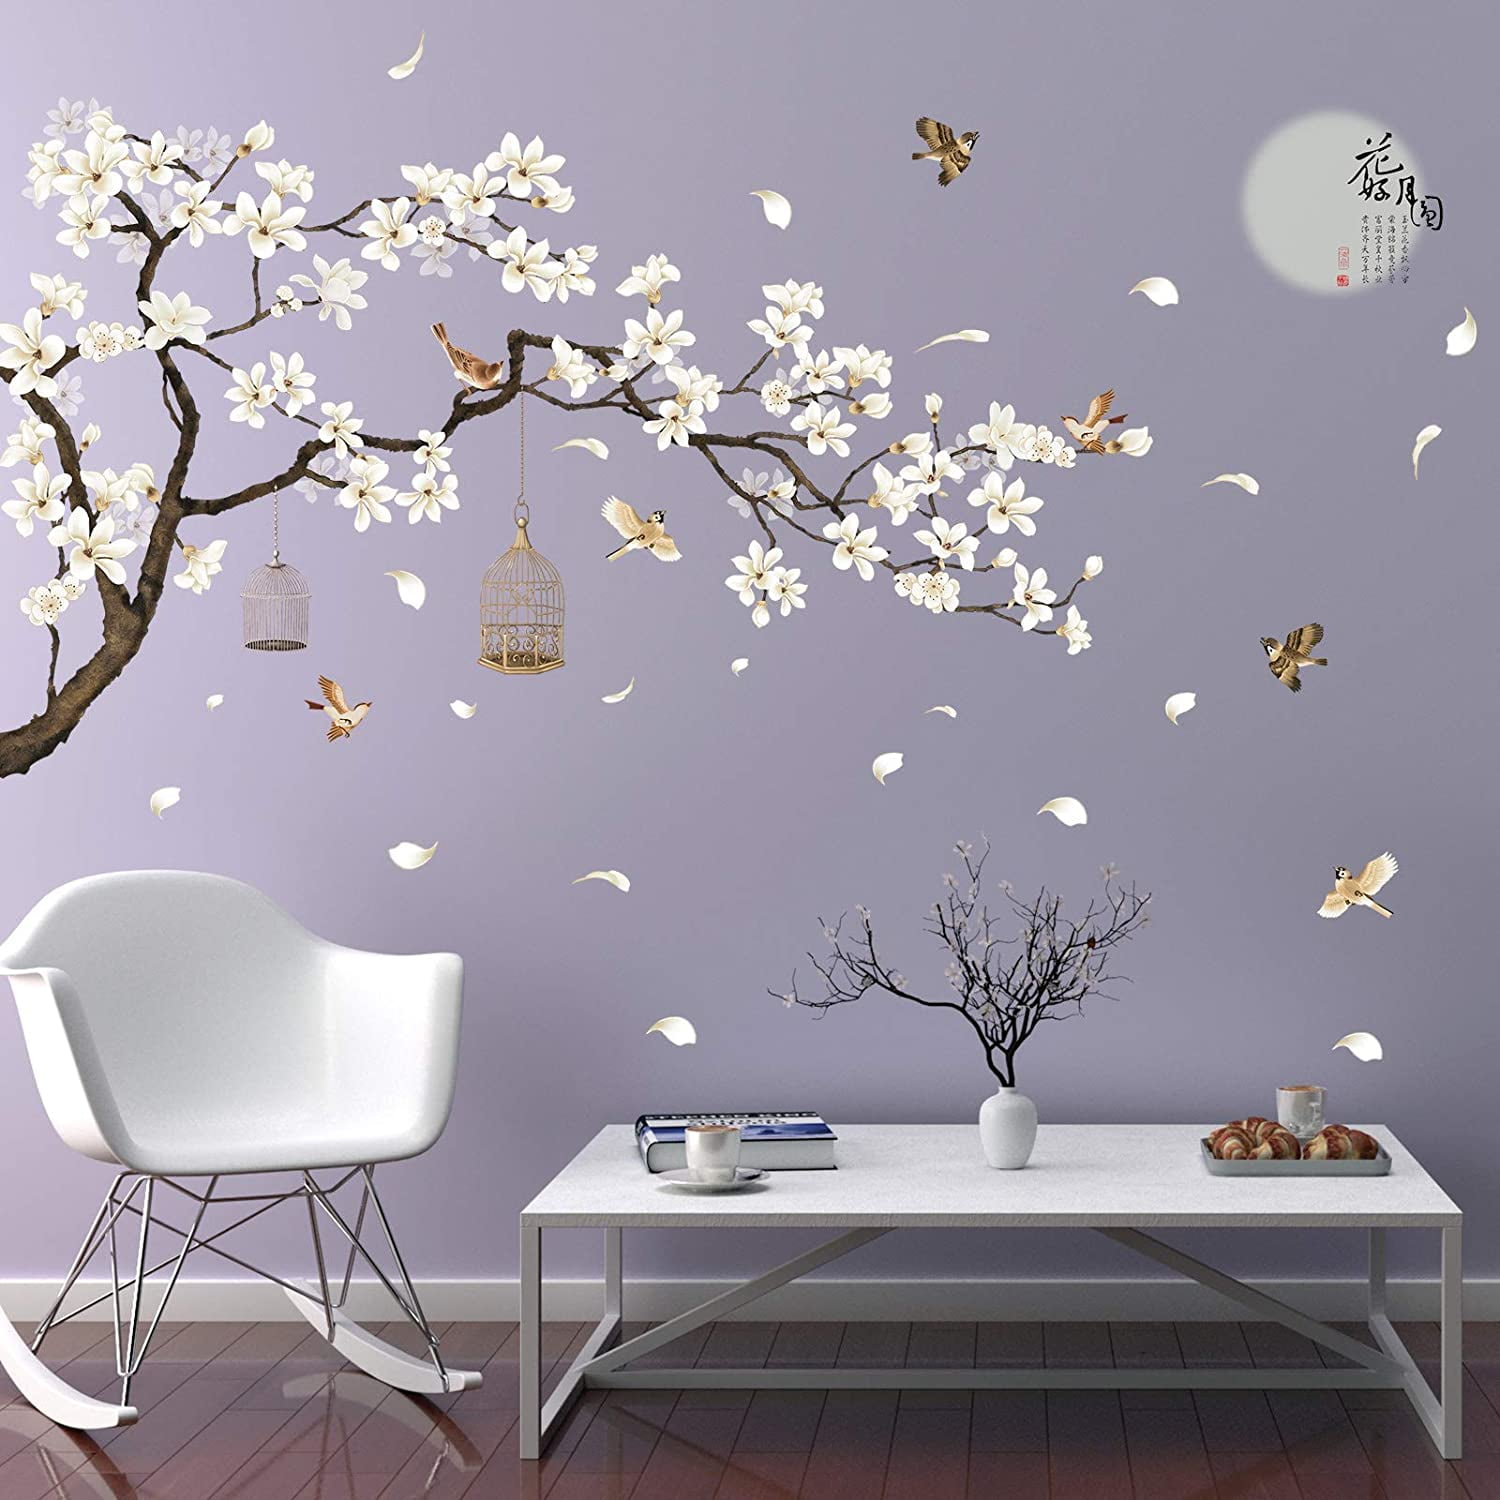 3D Blossom Flowers Rose Tree Wall Stickers Art Mural Removable Decal Decors DIY 